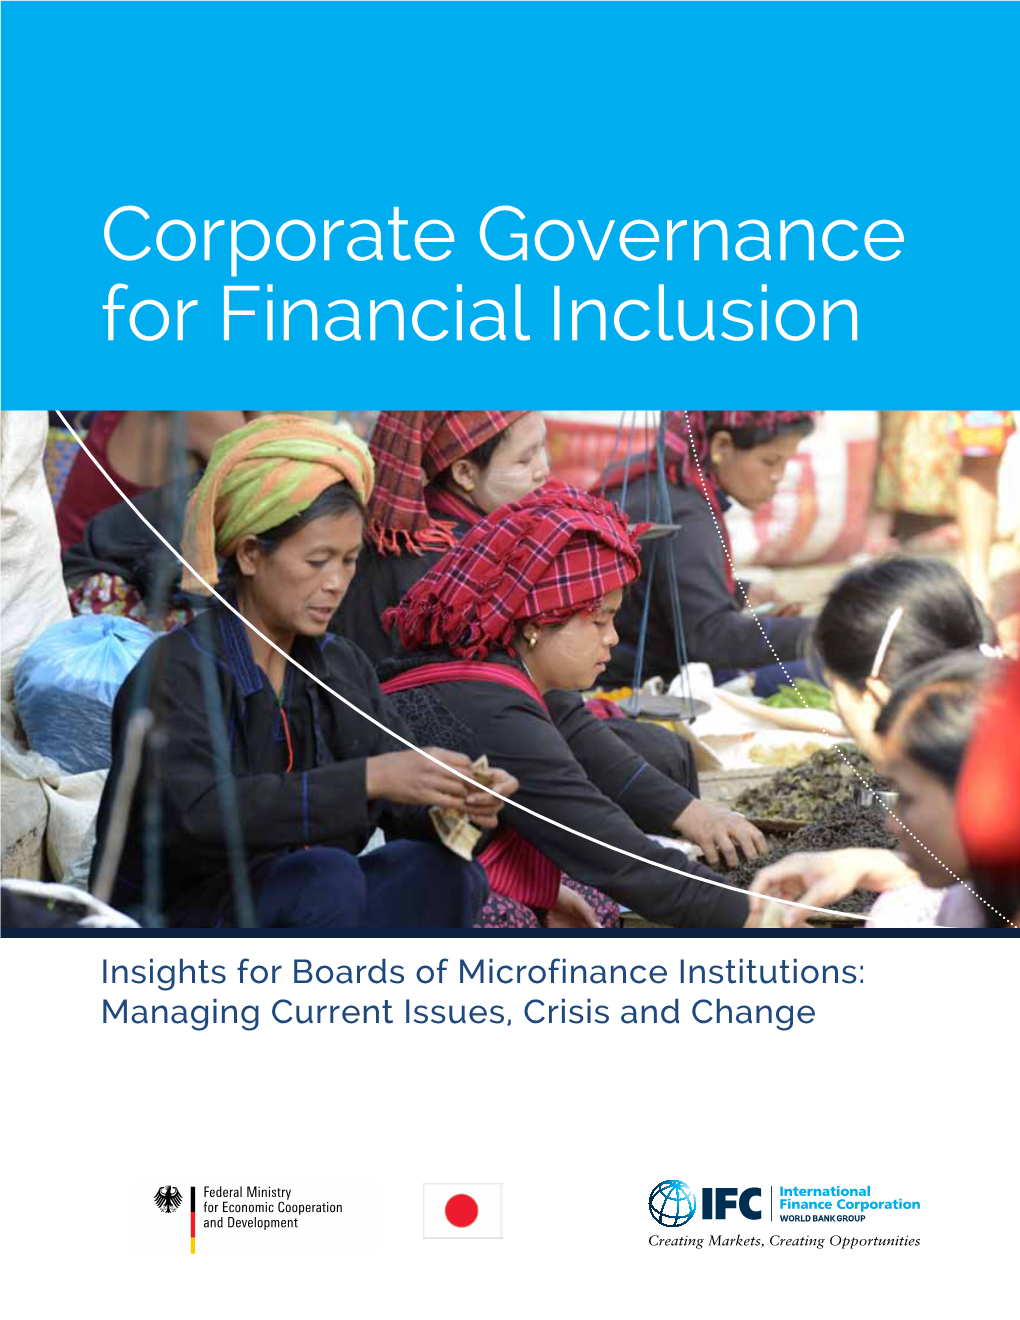 Corporate Governance for Financial Inclusion